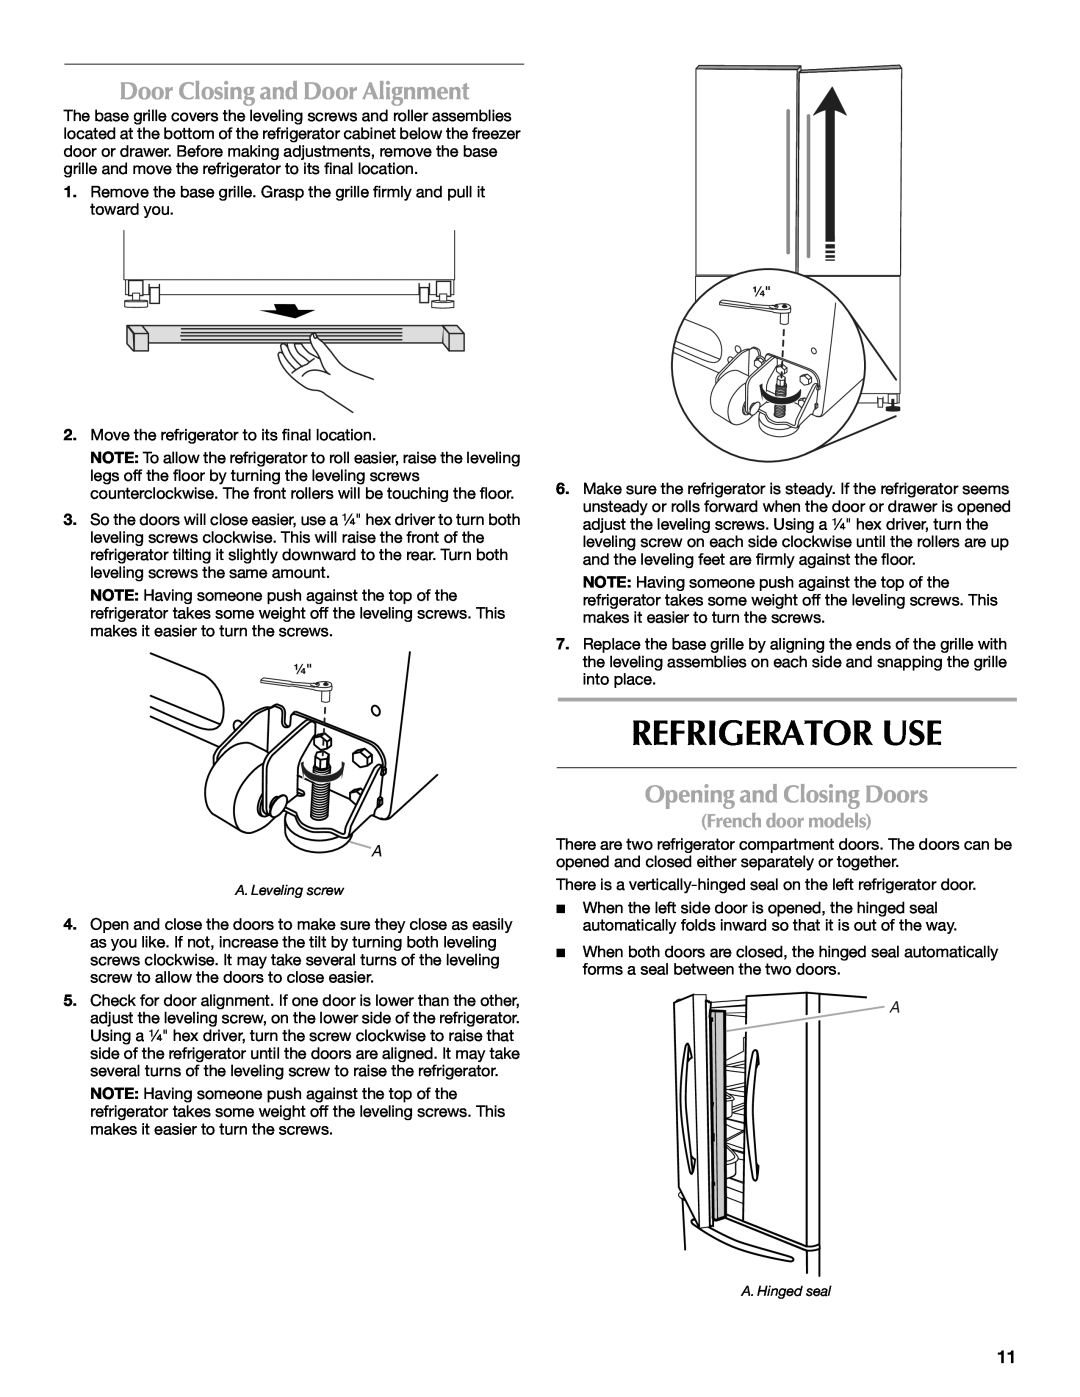 Maytag W10366206A Refrigerator Use, Door Closing and Door Alignment, Opening and Closing Doors, French door models 